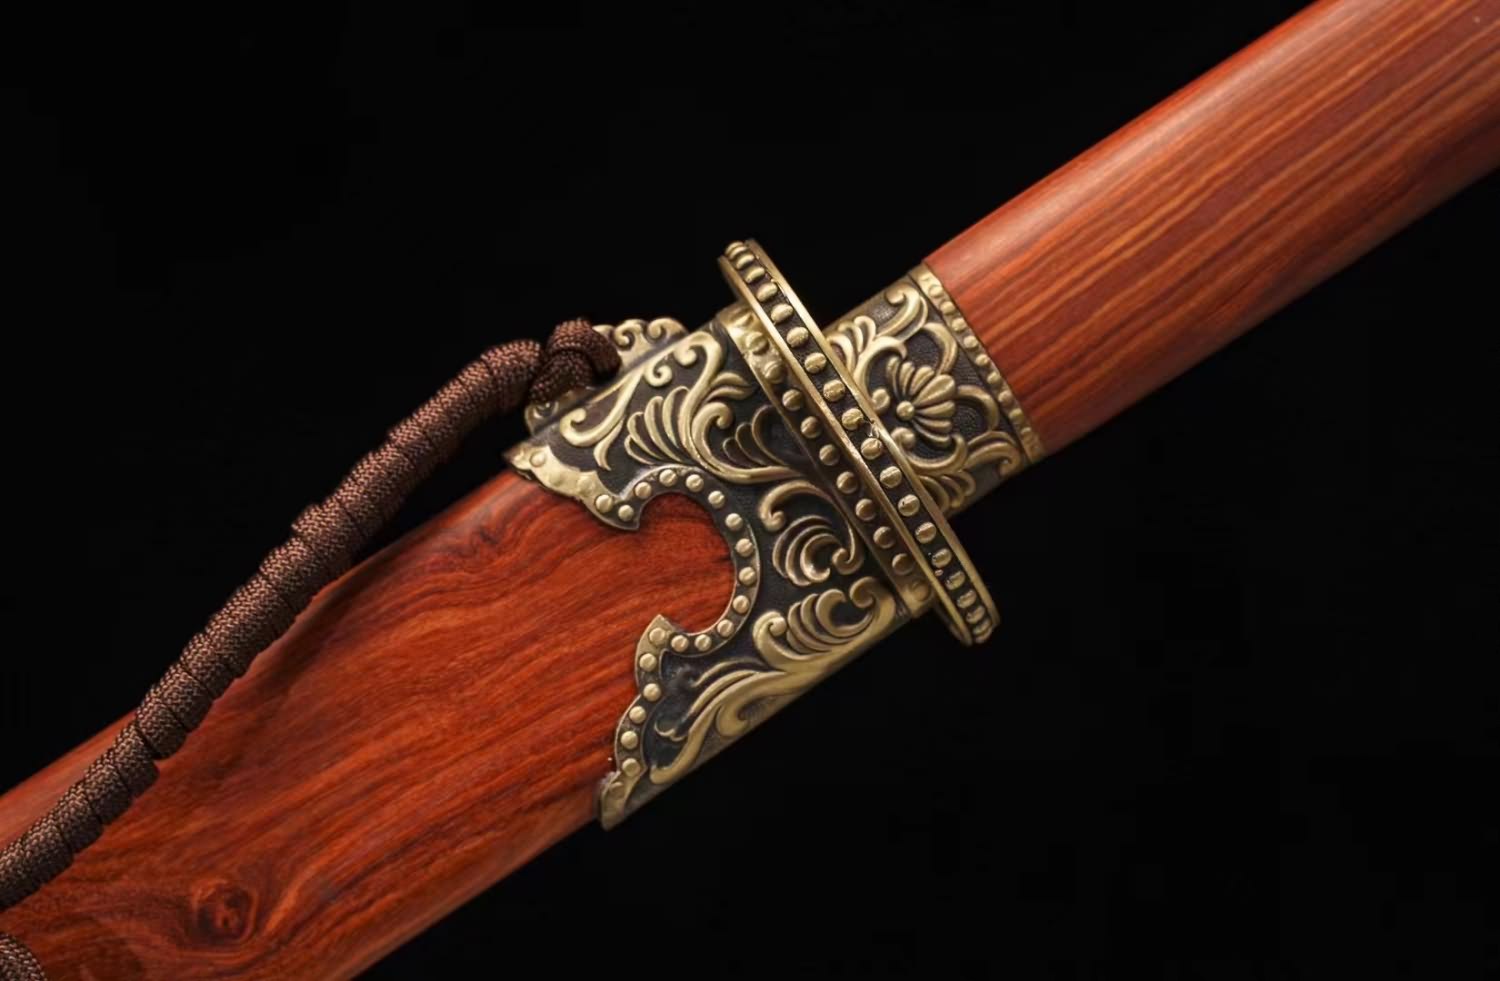 LOONGSWORD Chinese Ming Dynasty Imperial Guard Sword, Traditional Hand-Forged Damascus Steel Blade, Exquisite Brass Fittings, and Solid Acid Branchwood Scabbard - 41 Inches